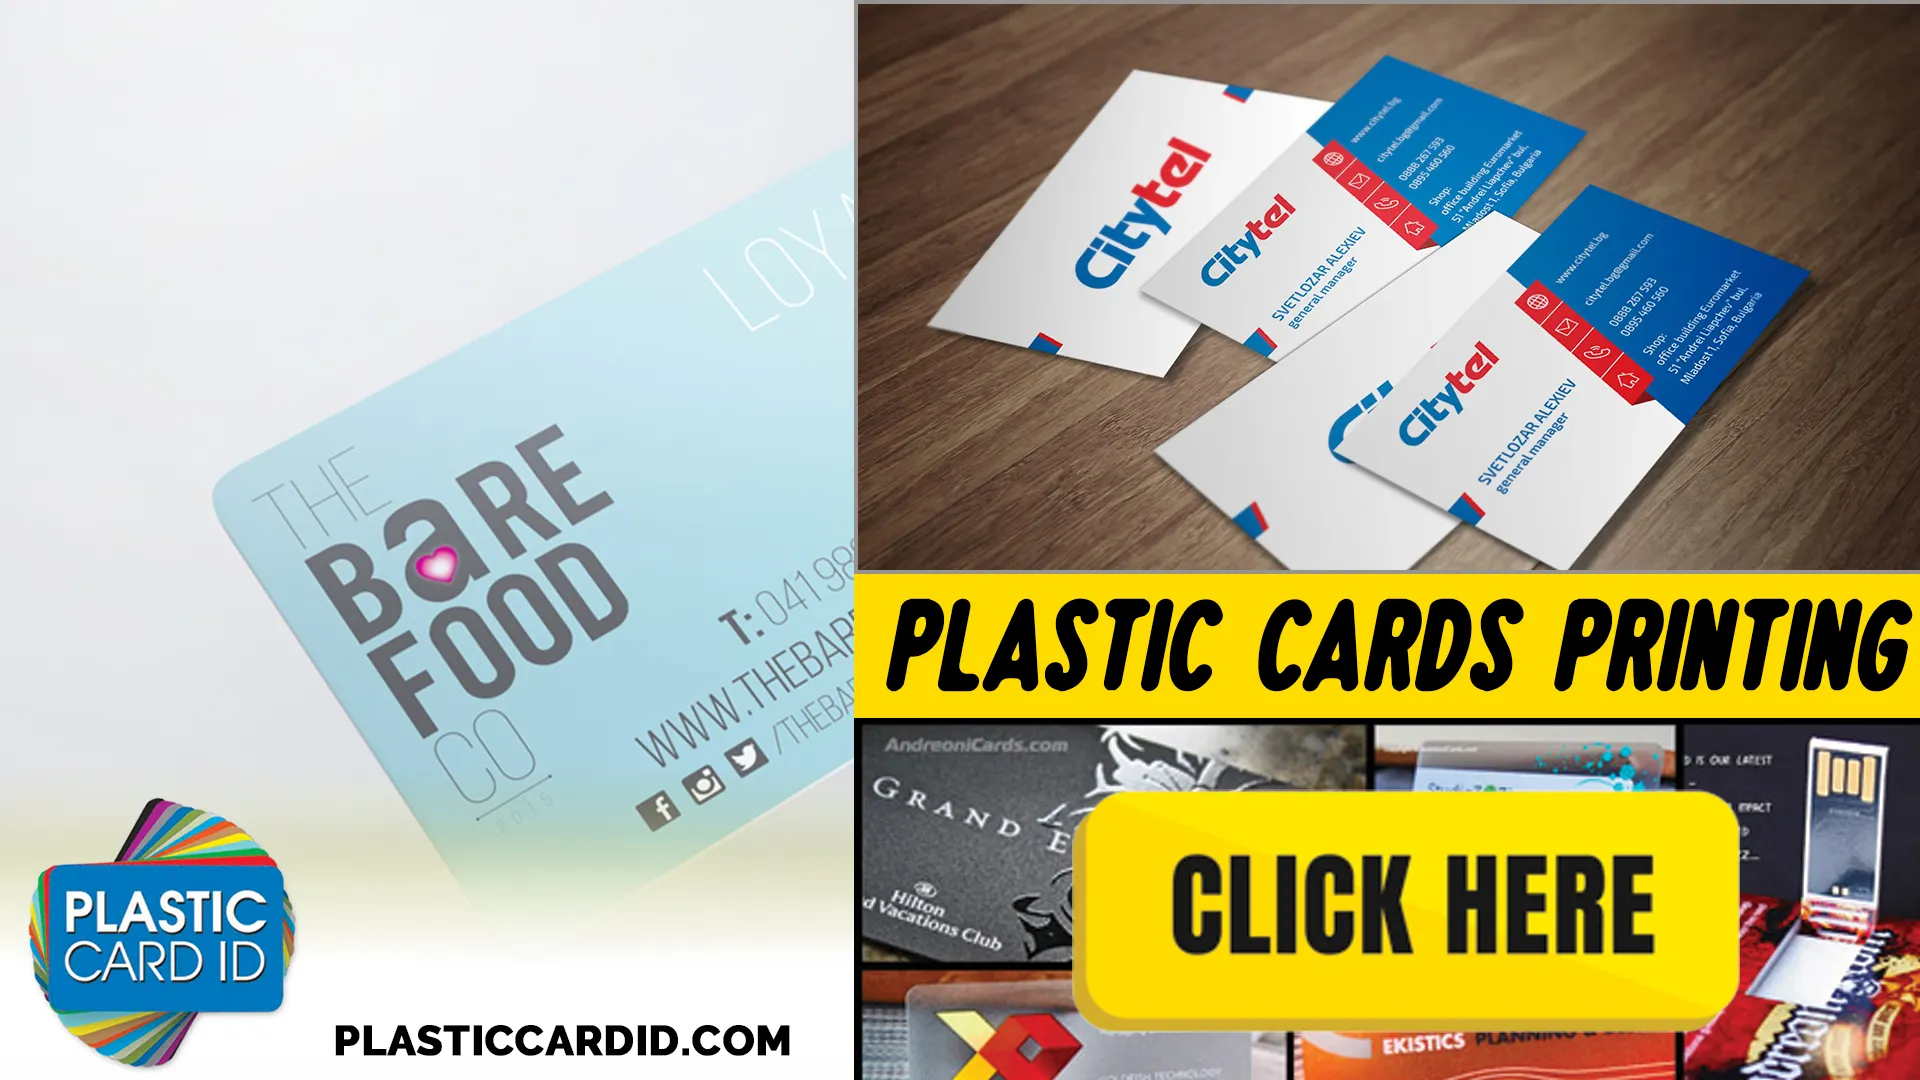 Welcome to the Cutting Edge of Future Card Design Innovations